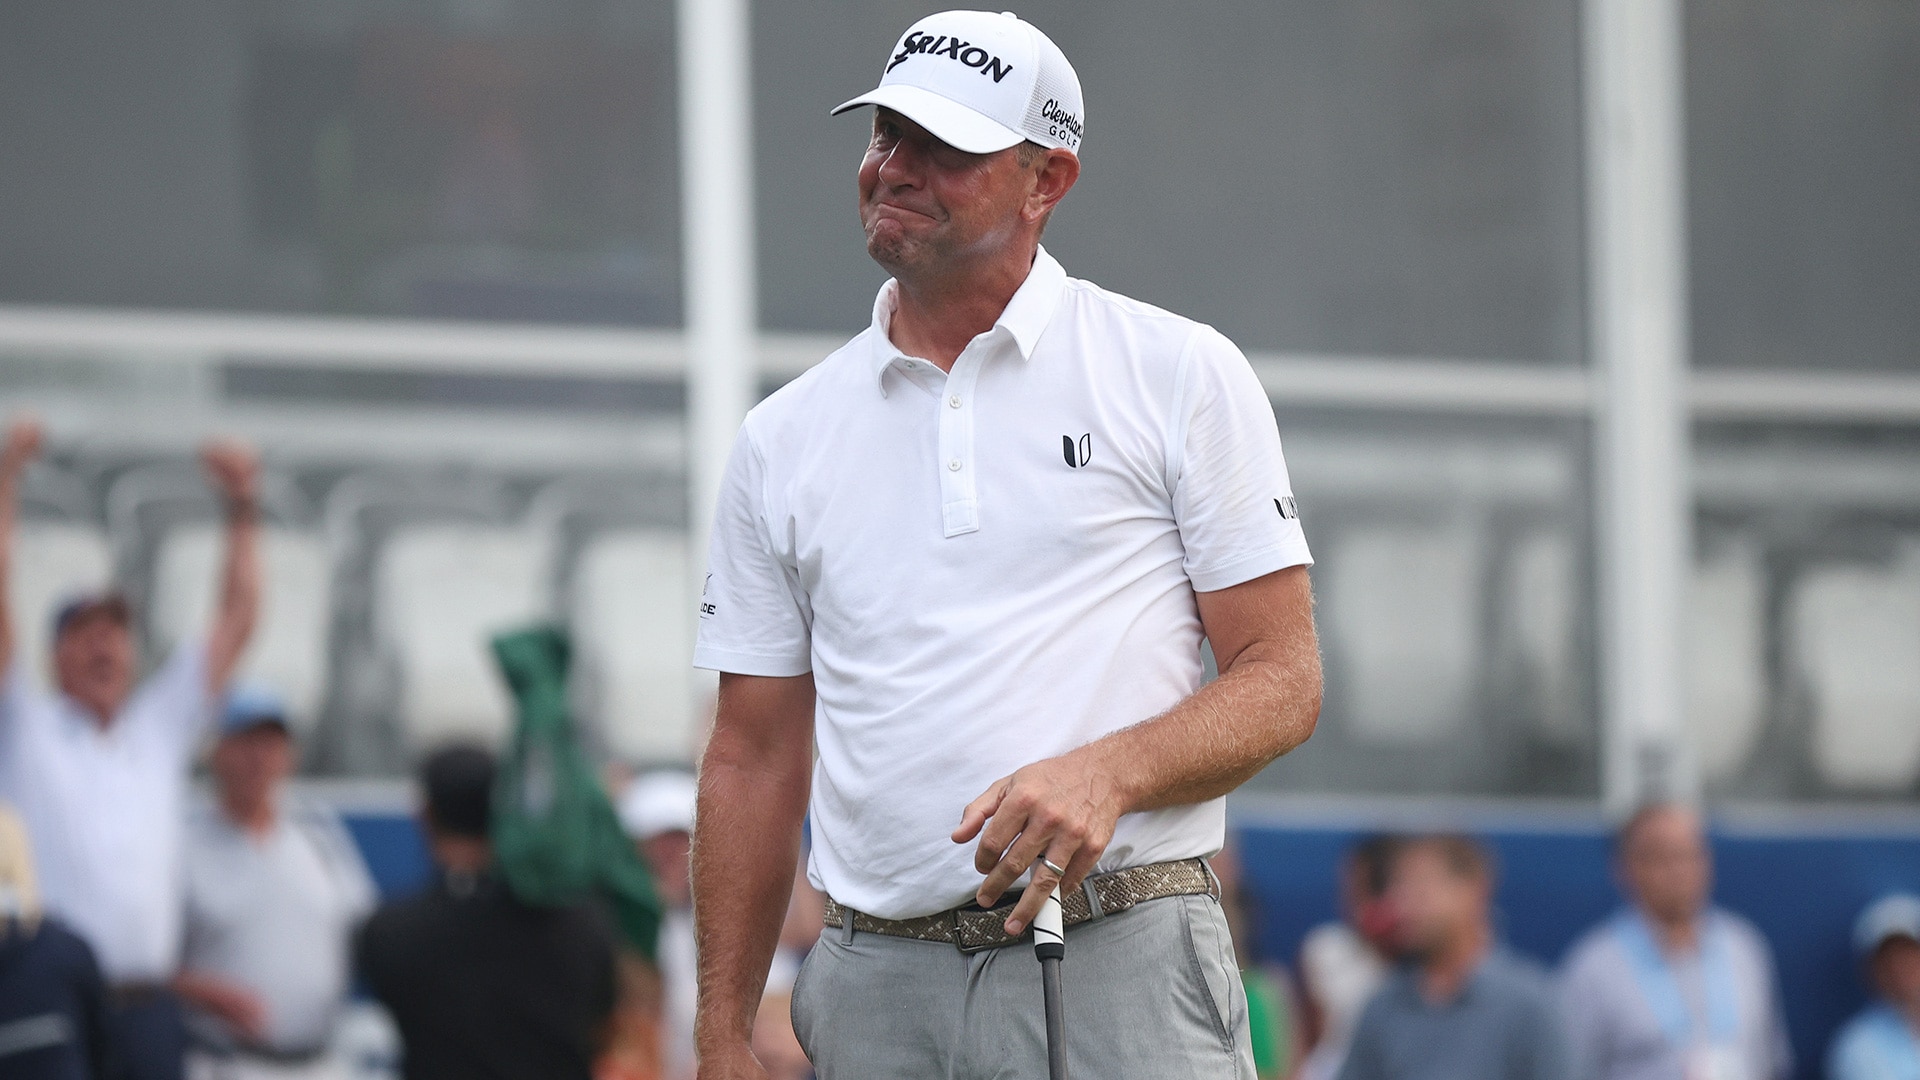 Wyndham Championship payout: Big pay day, huge FedExCup points boost for Lucas Glover